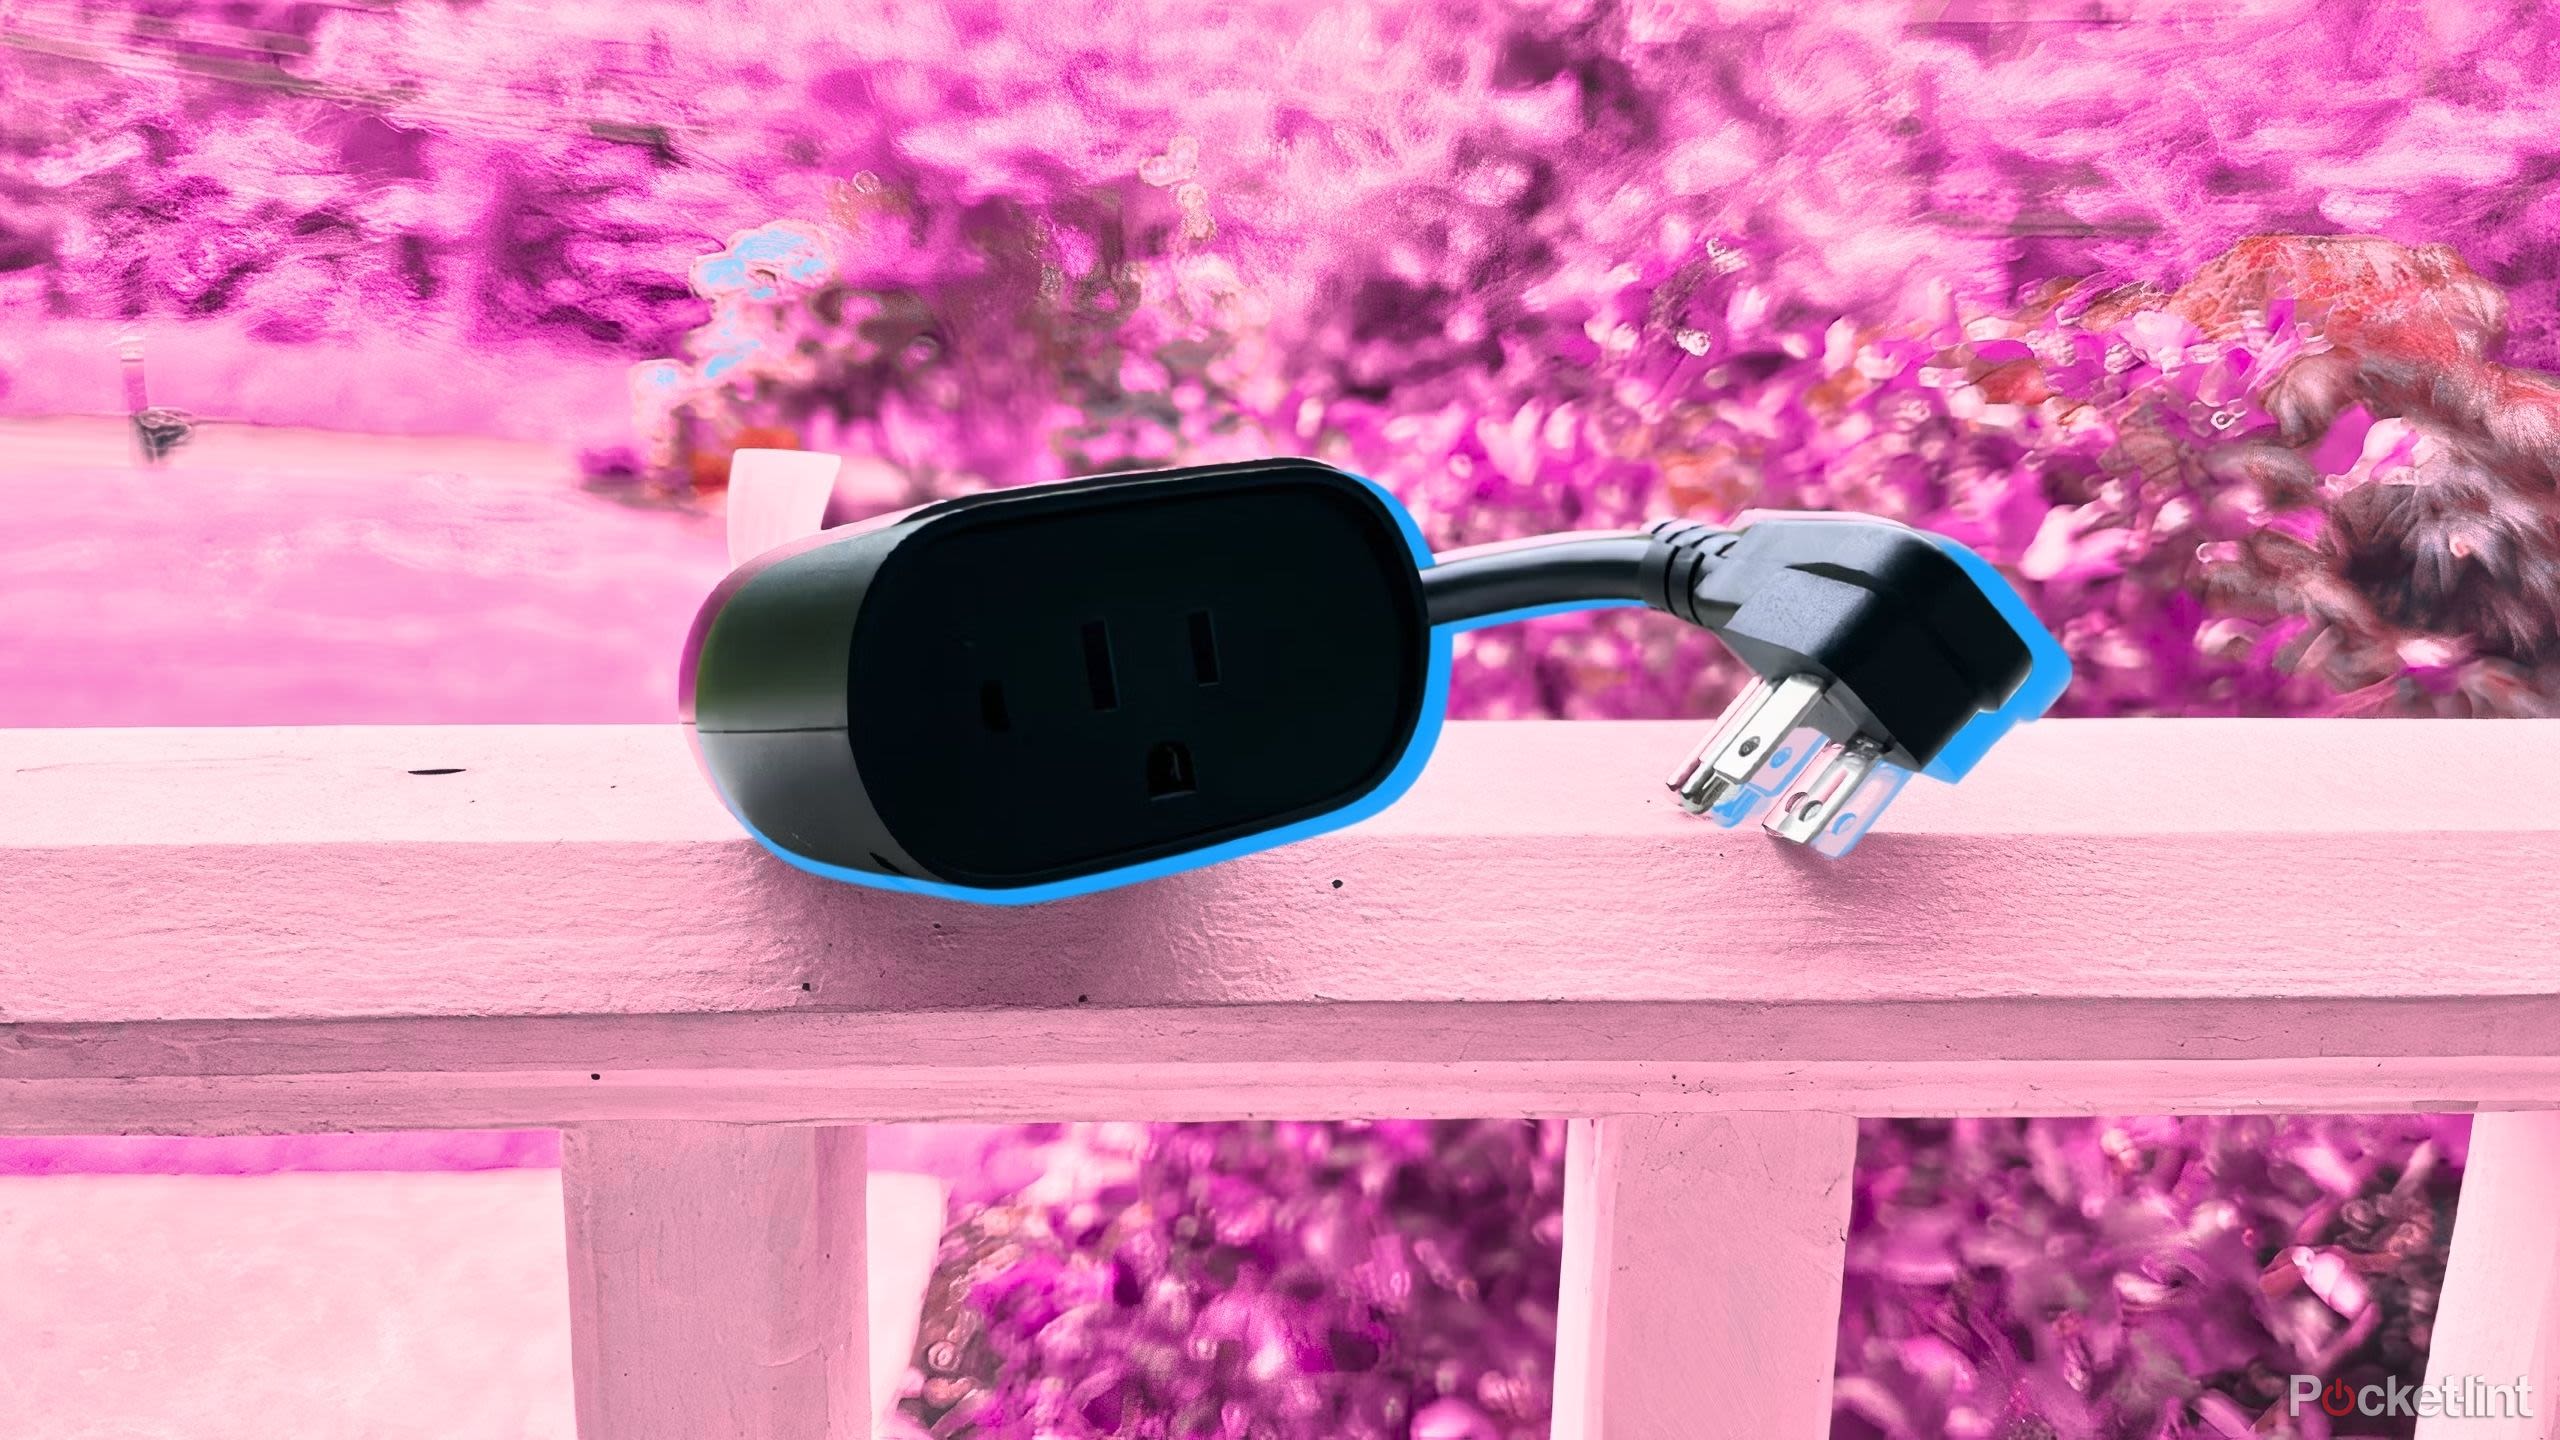 I can't host an outdoor party now without this Kasa Smart Dimmer Plug